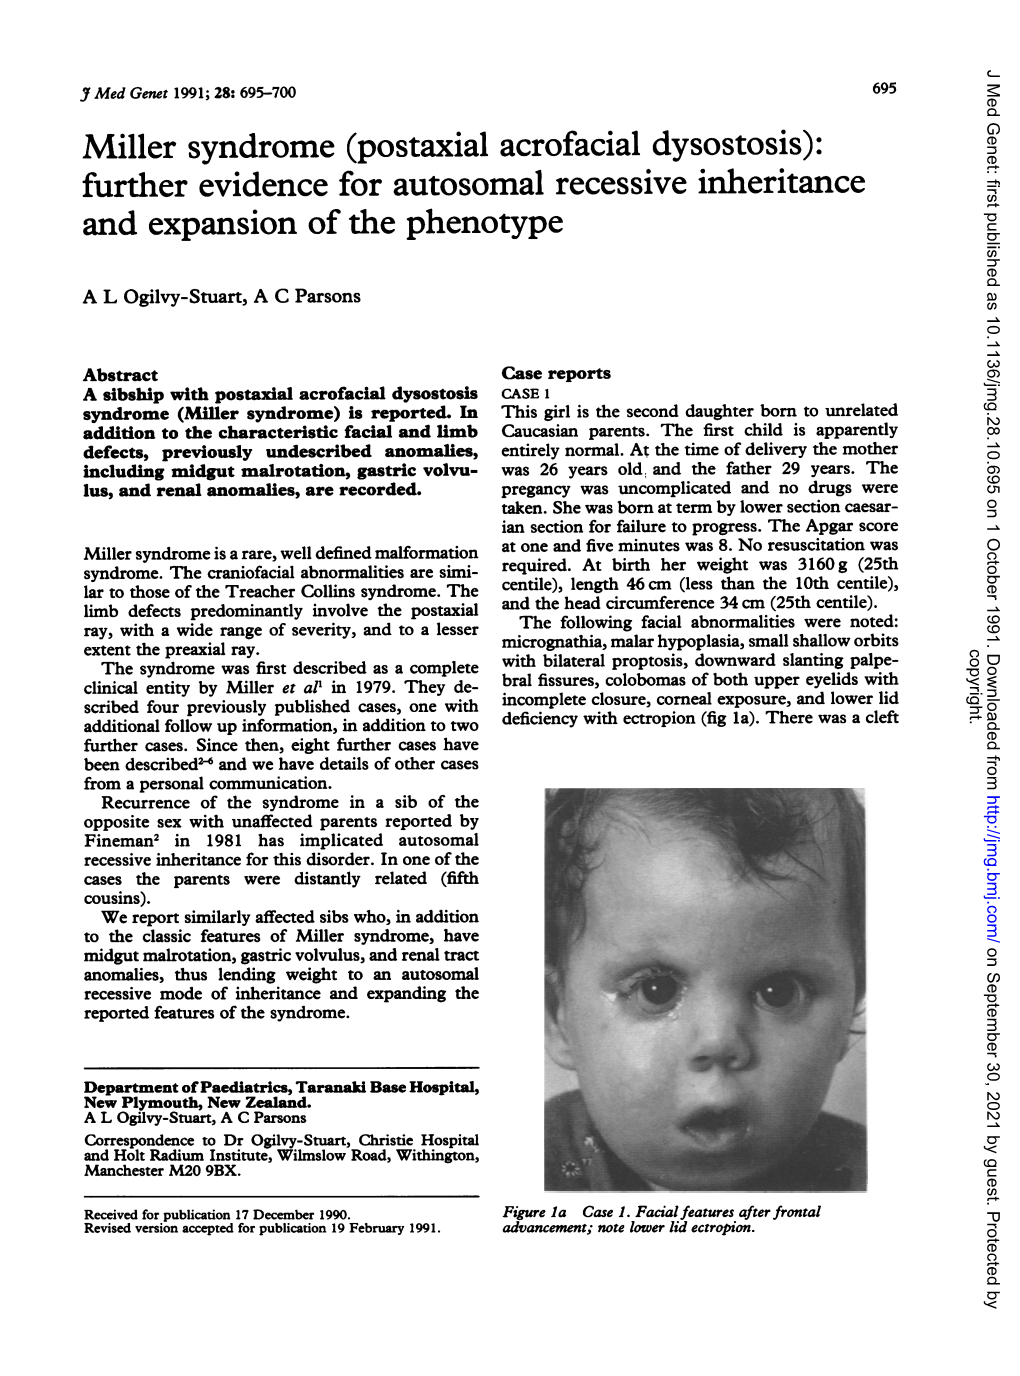 Miller Syndrome (Postaxial Acrofacial Dysostosis): and Expansion of The